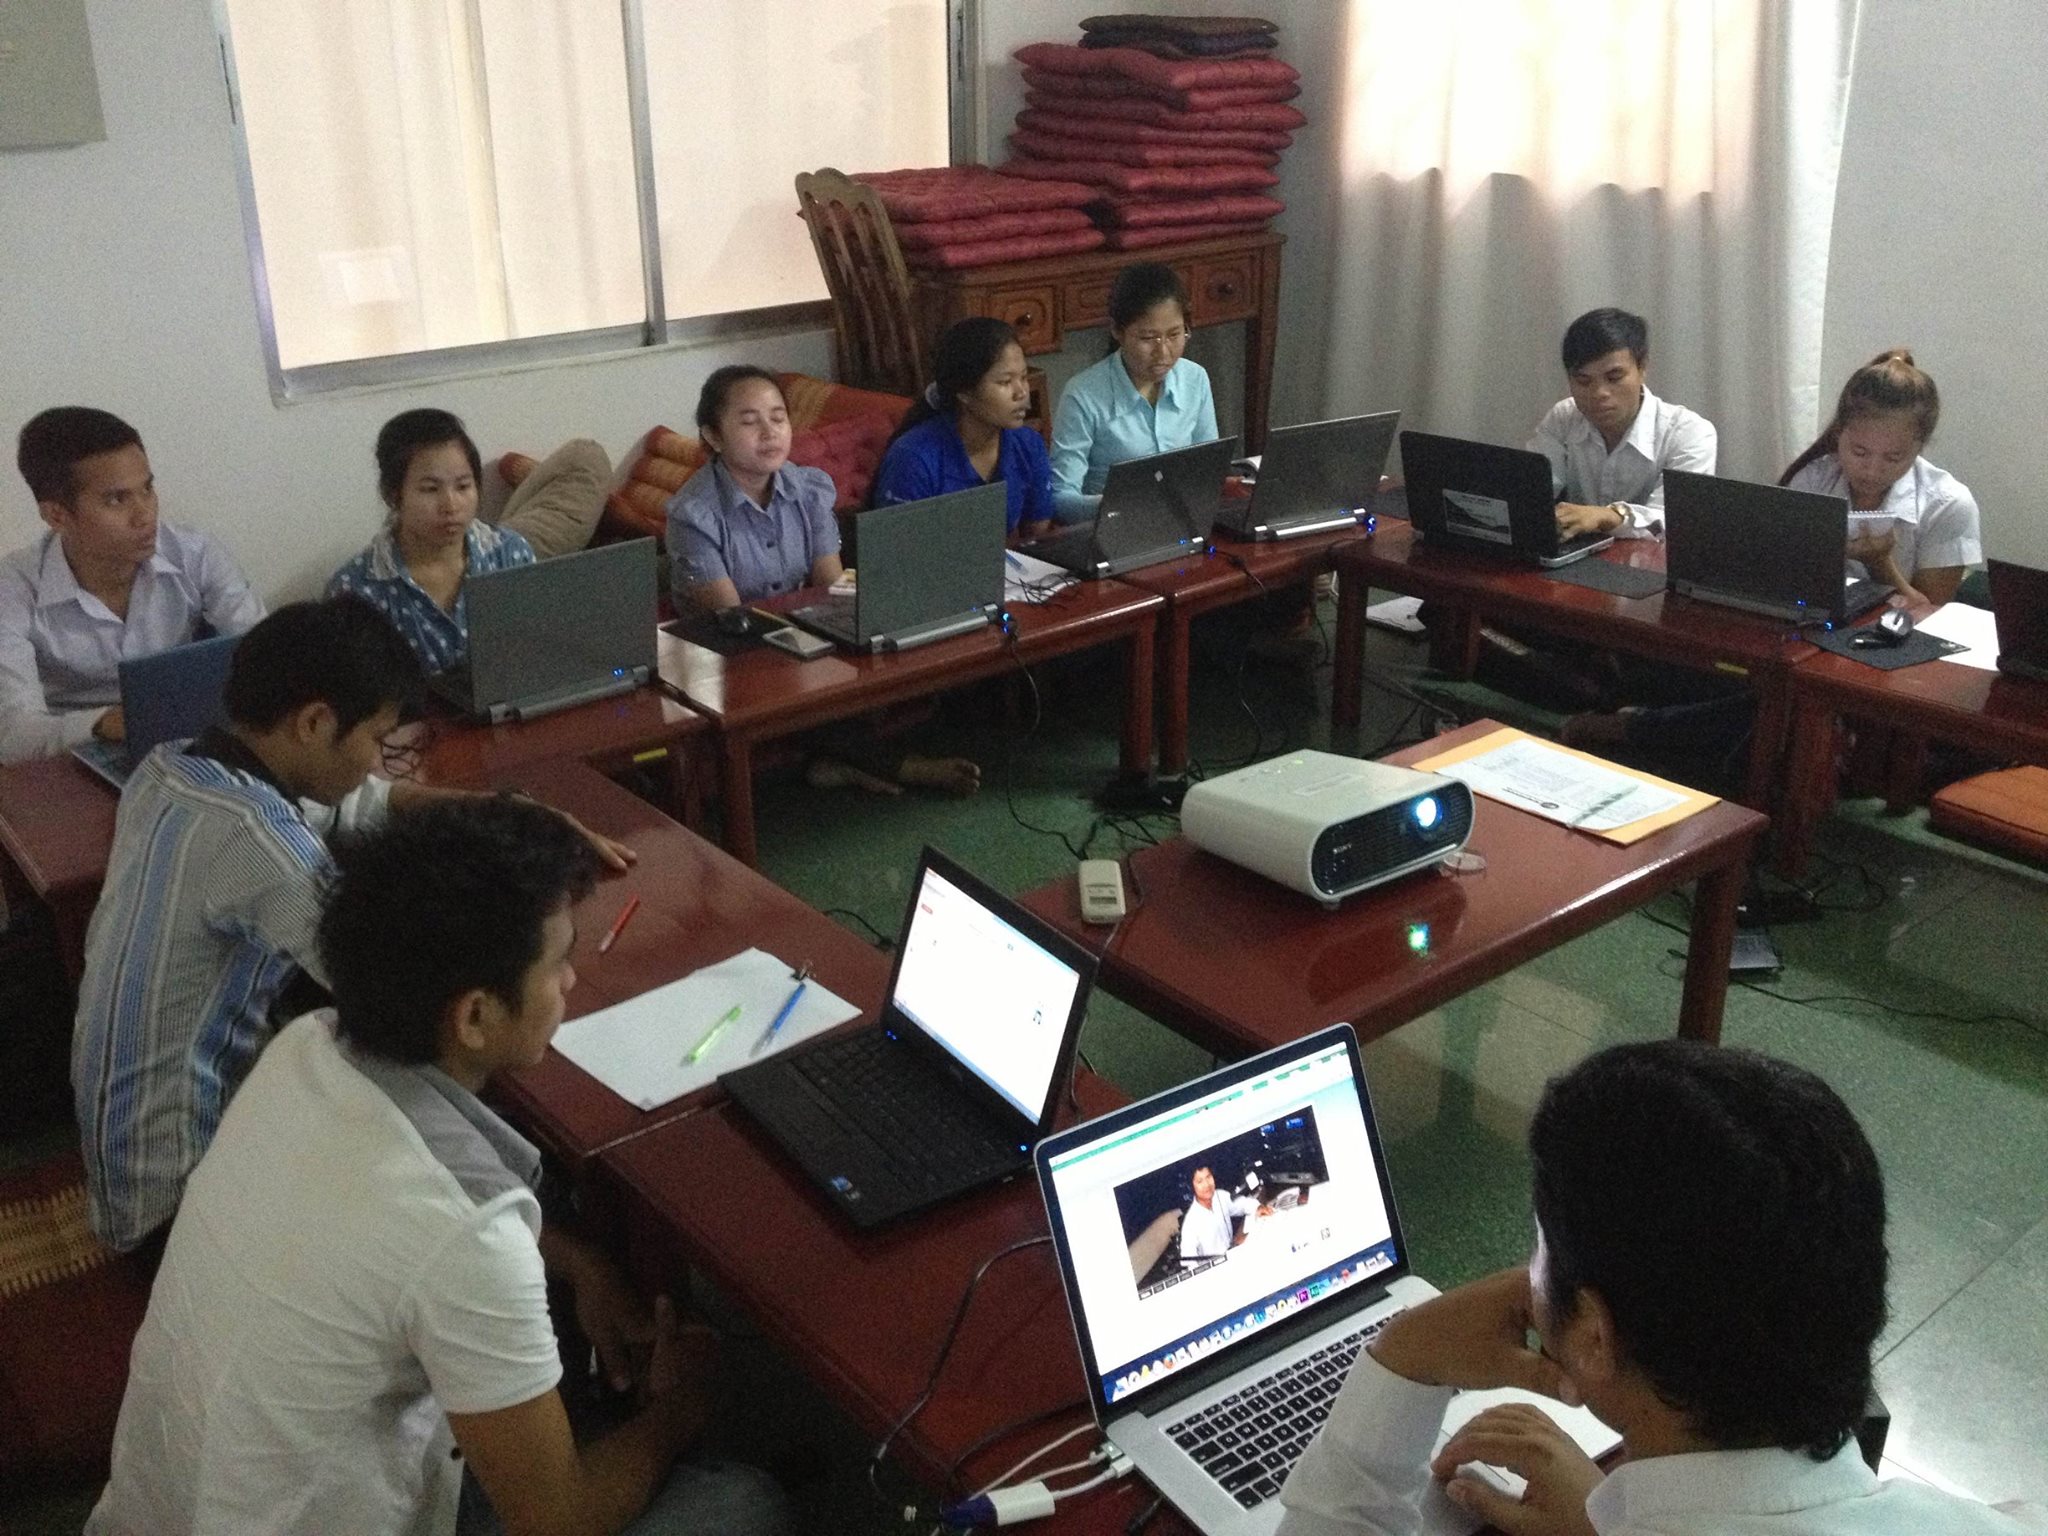 Indigenous youths coming from difference provinces attended the training on “Video Journalism” organized by CCHR’s at Sithi Hub in June 2014. (photo provided by CCHR) 